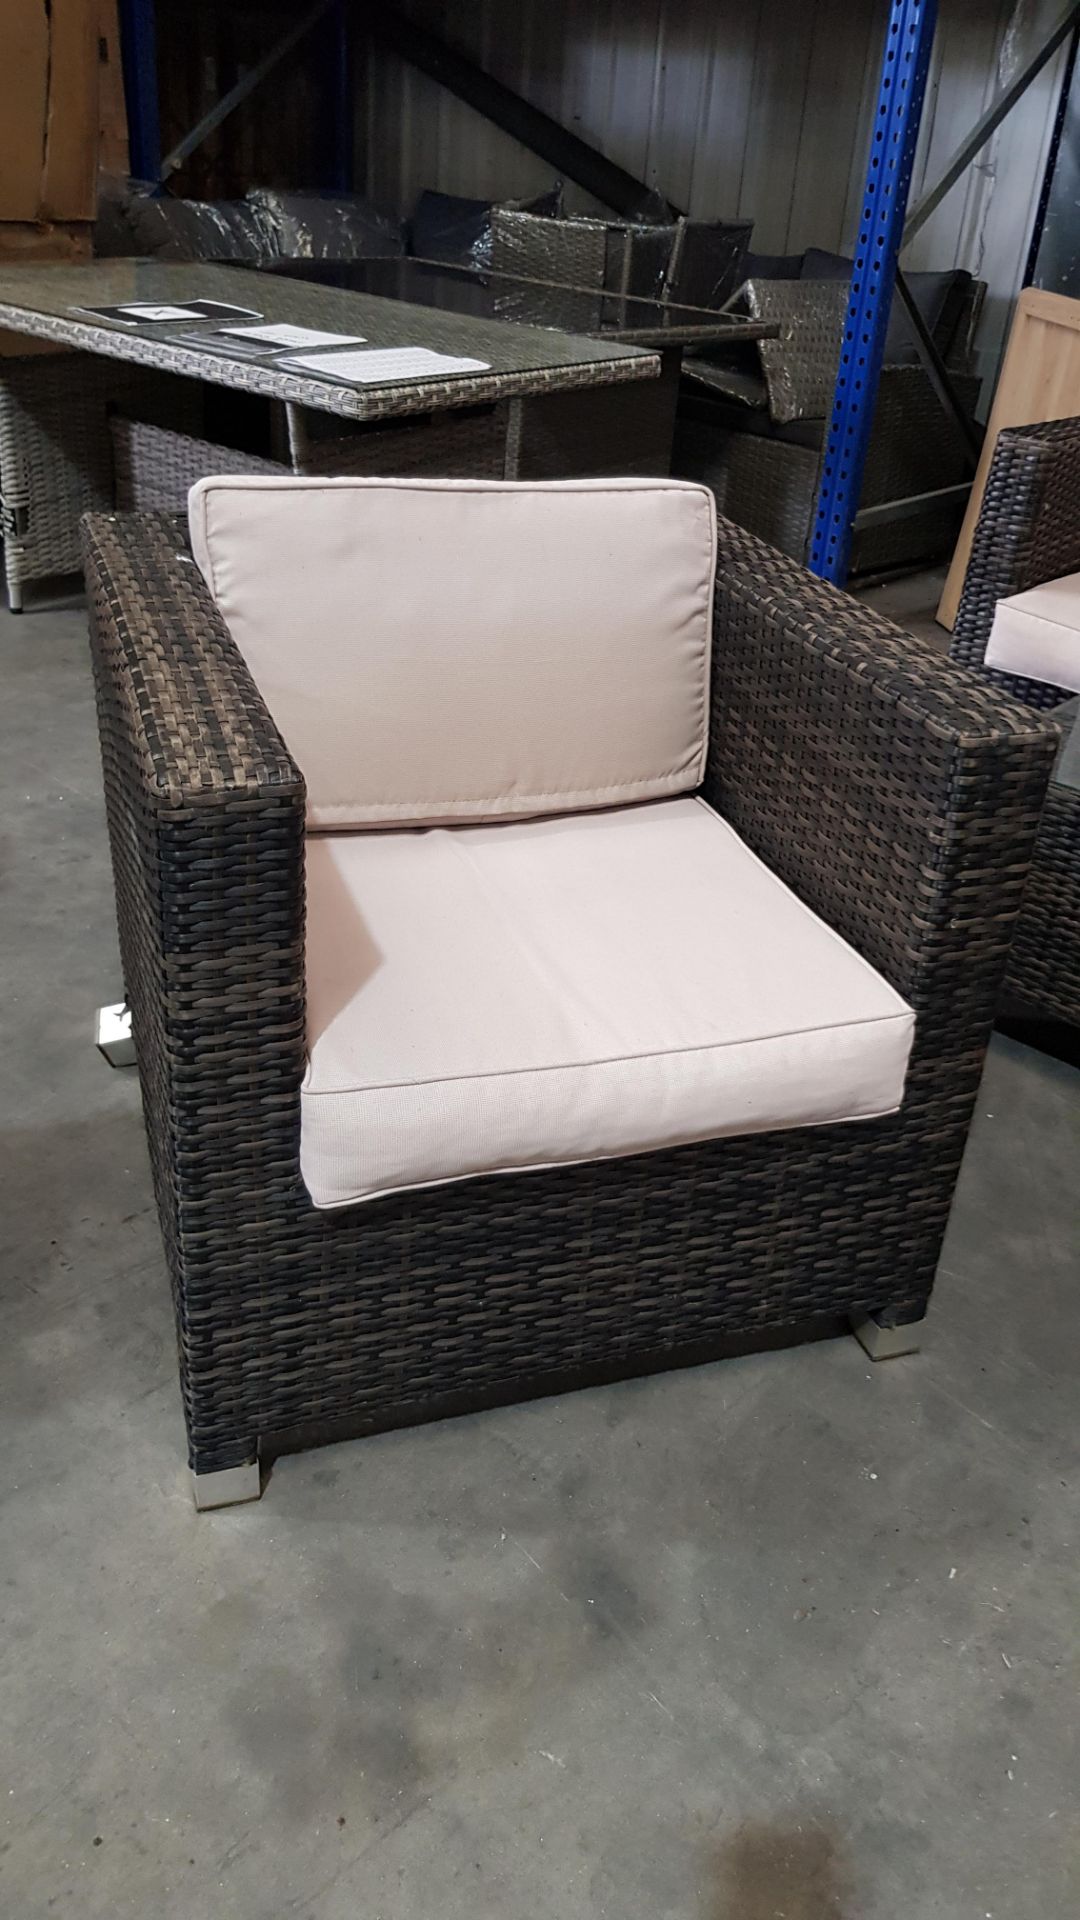 (R16) 1x 5 Seat Rattan Furniture Set With 10x Cushions - Image 2 of 5